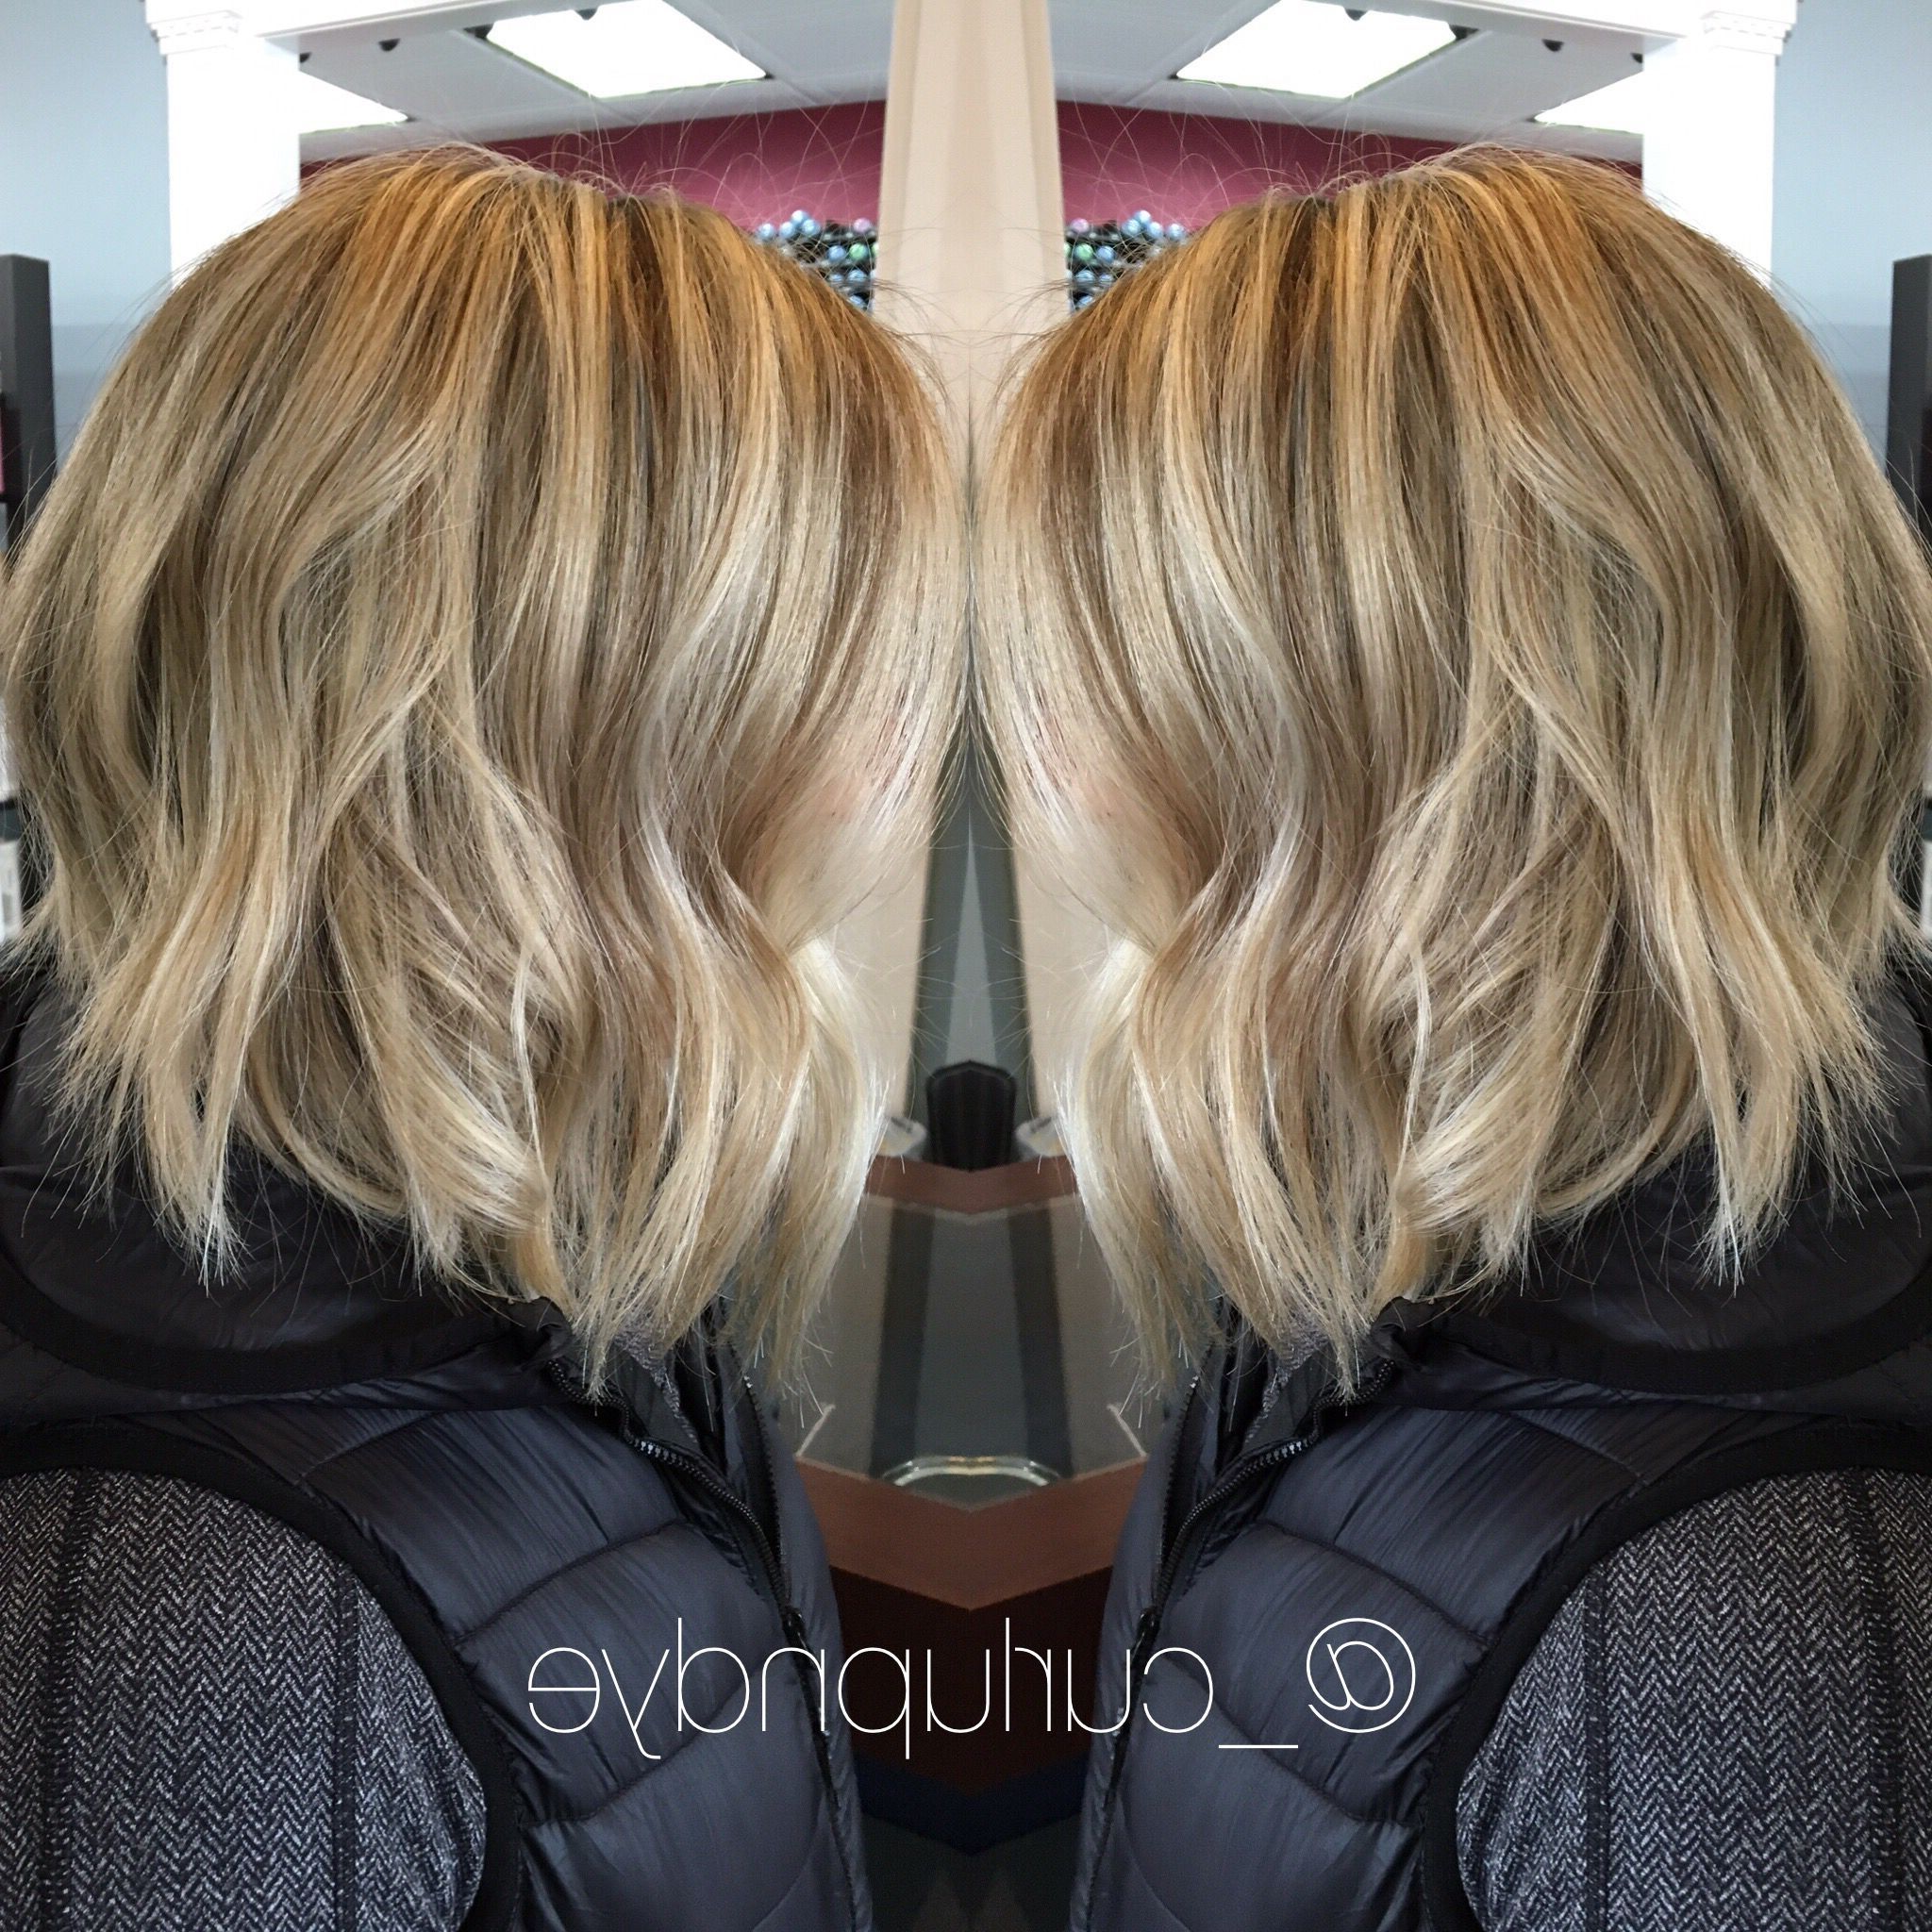 Latest Pearl Blonde Bouncy Waves Hairstyles With Short Hair #blonde #icy #pearl #highlights #wavy #beachwaves #bob (View 3 of 20)